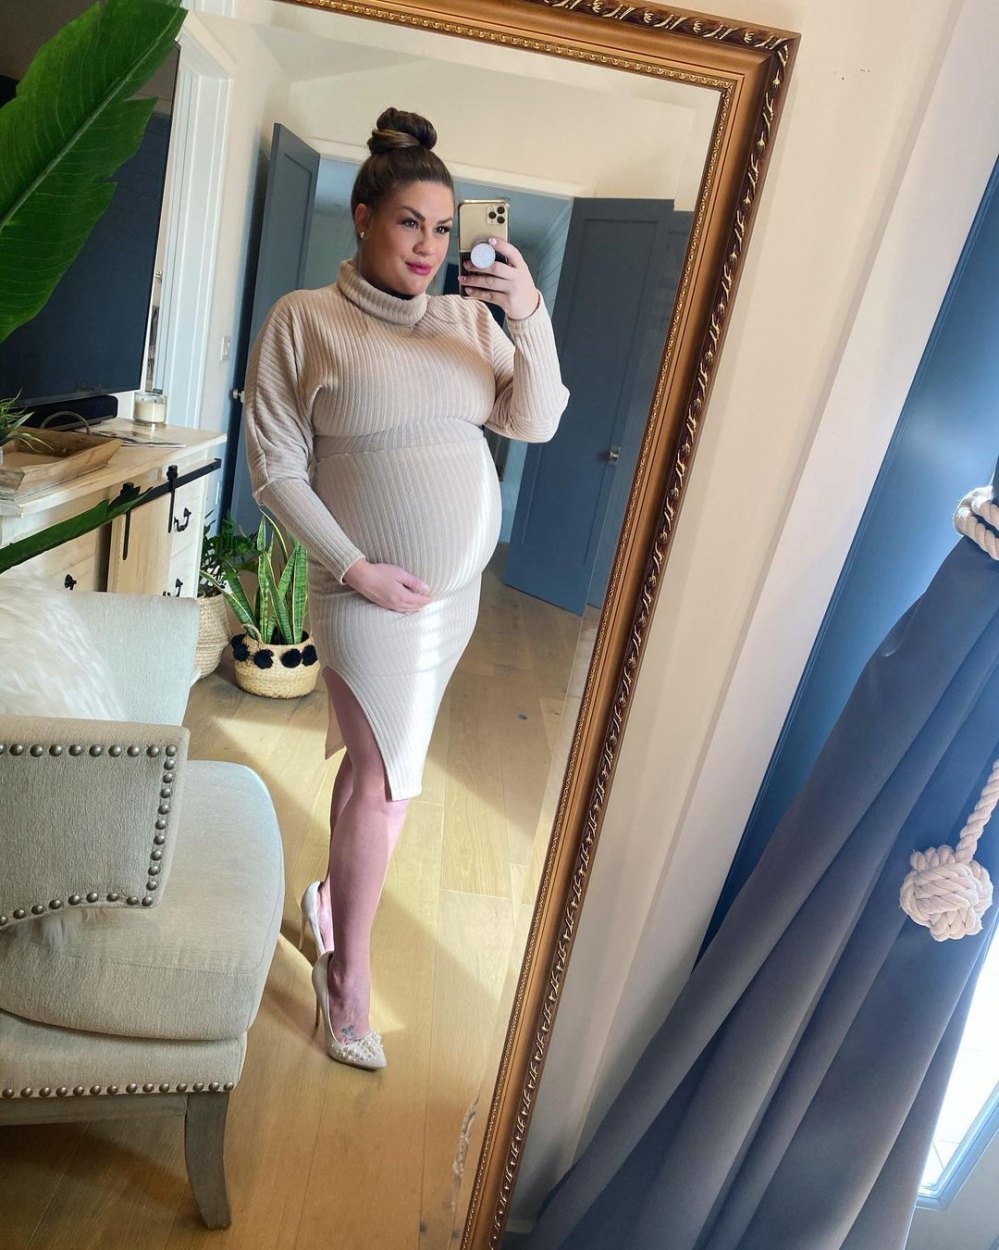 Pregnant Brittany Cartwright Wears Wedding Shoes and Earrings in Maternity Shoot